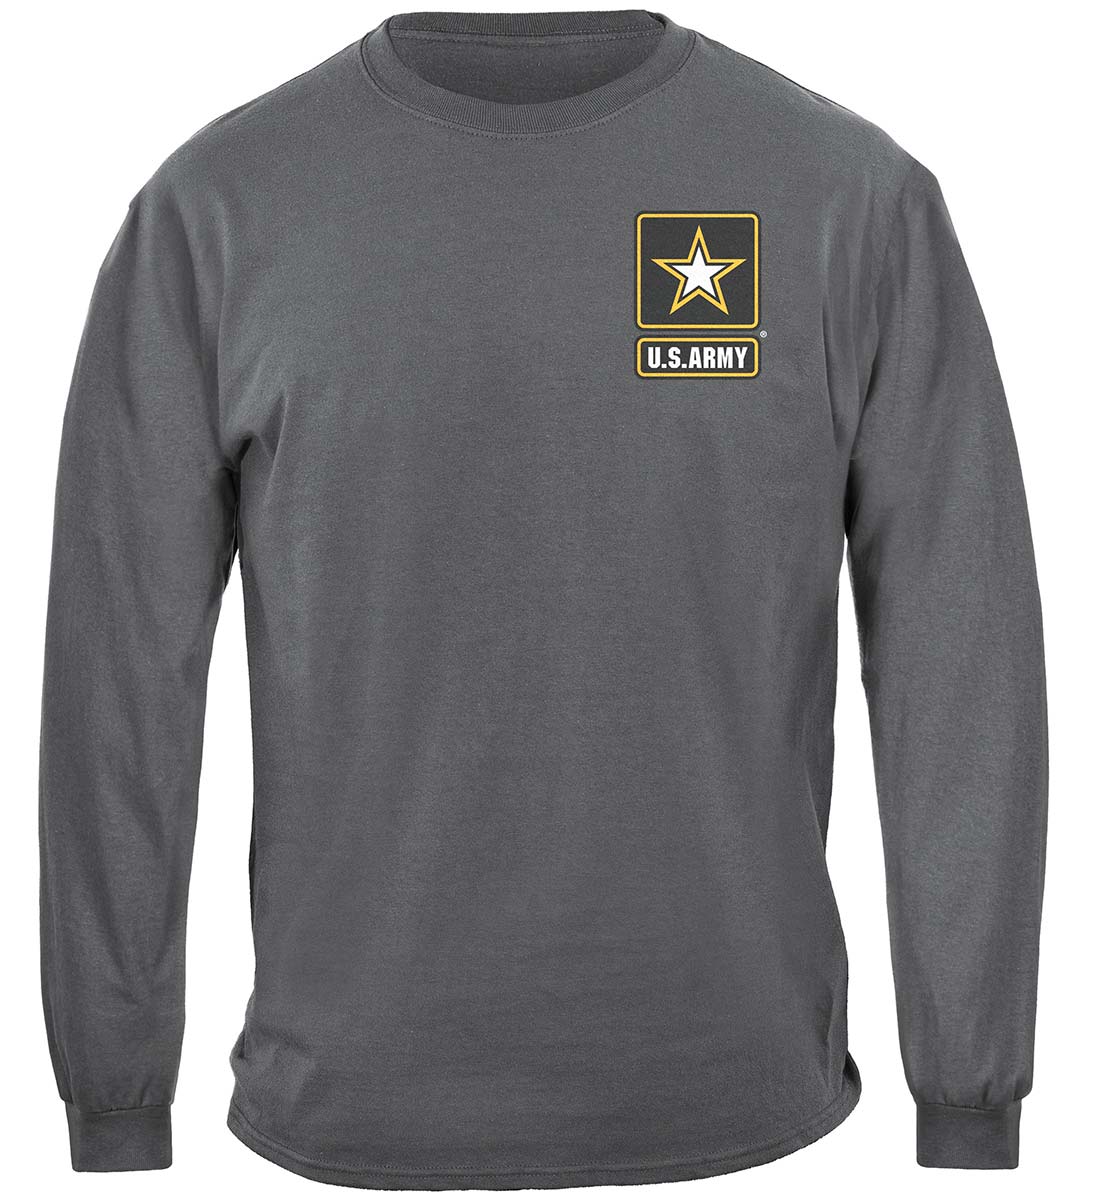 Army These Color Don't Run Premium Long Sleeves